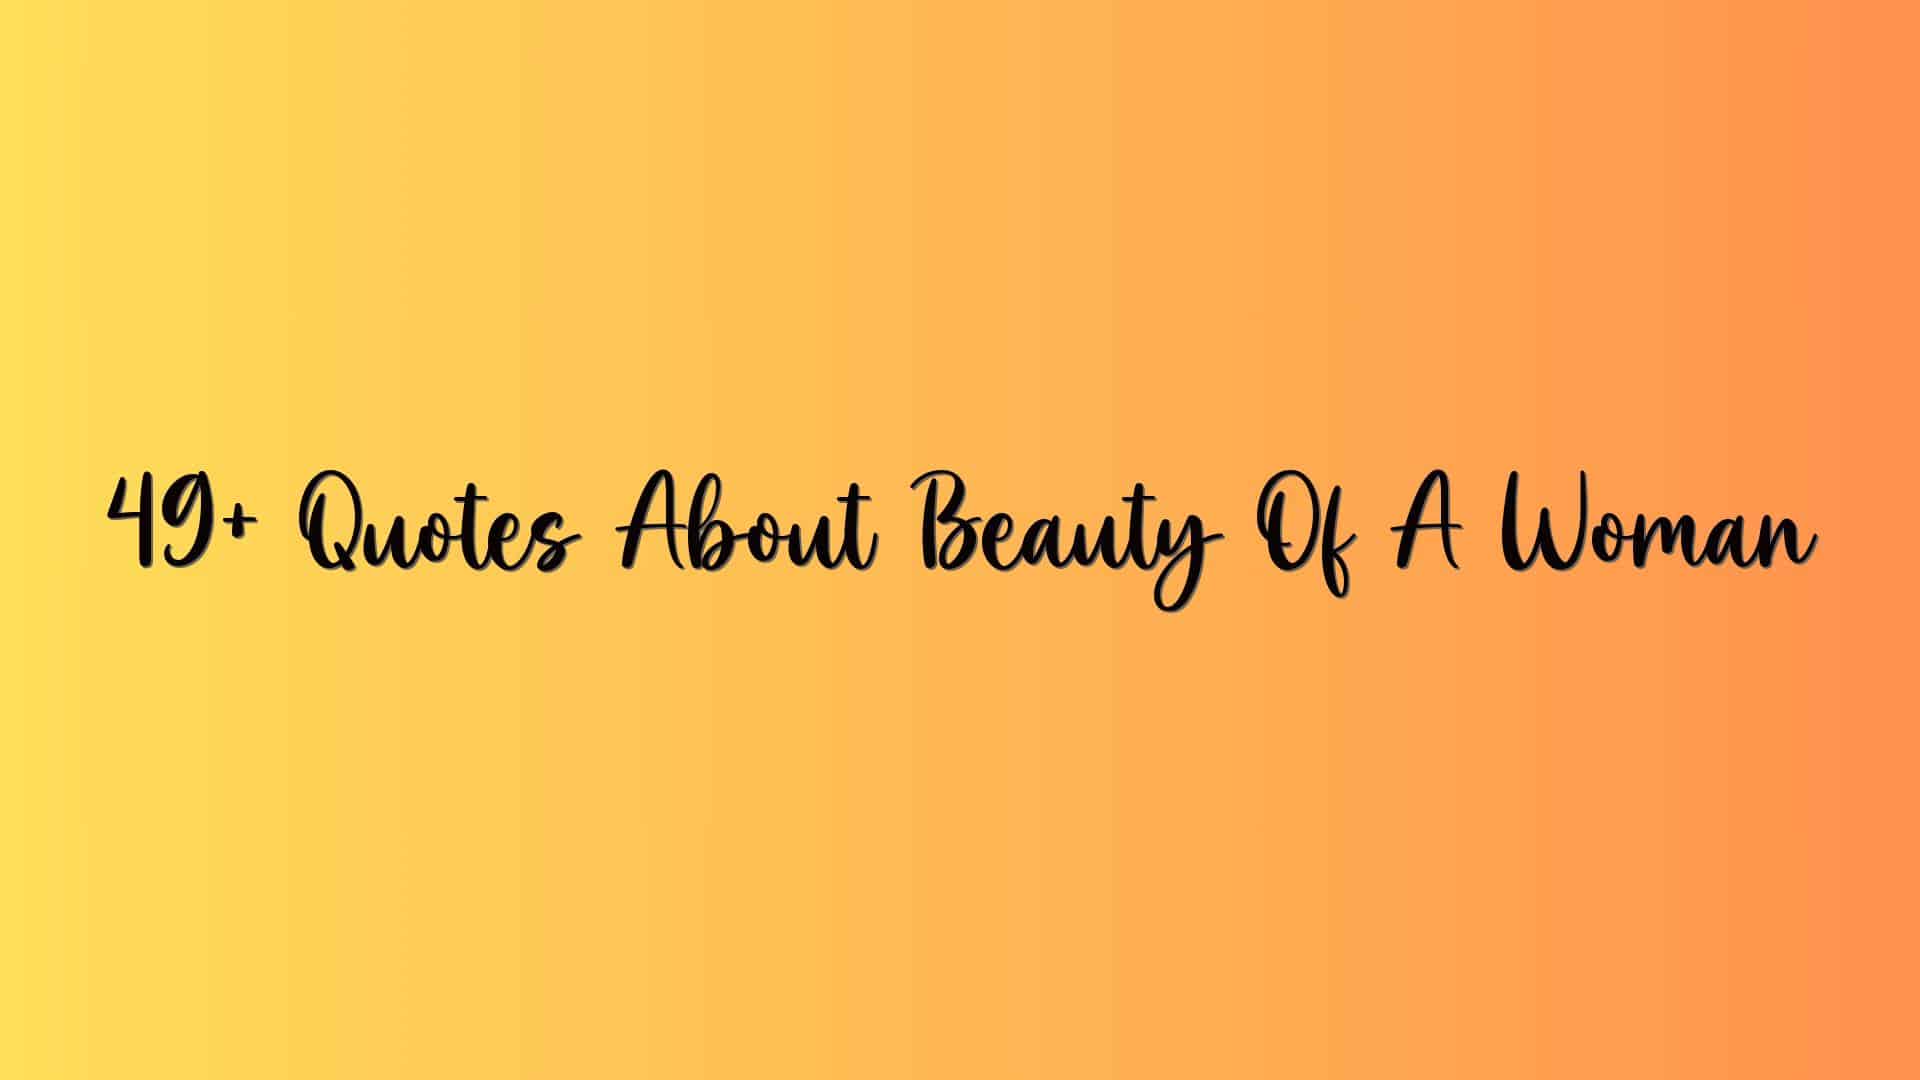 49+ Quotes About Beauty Of A Woman